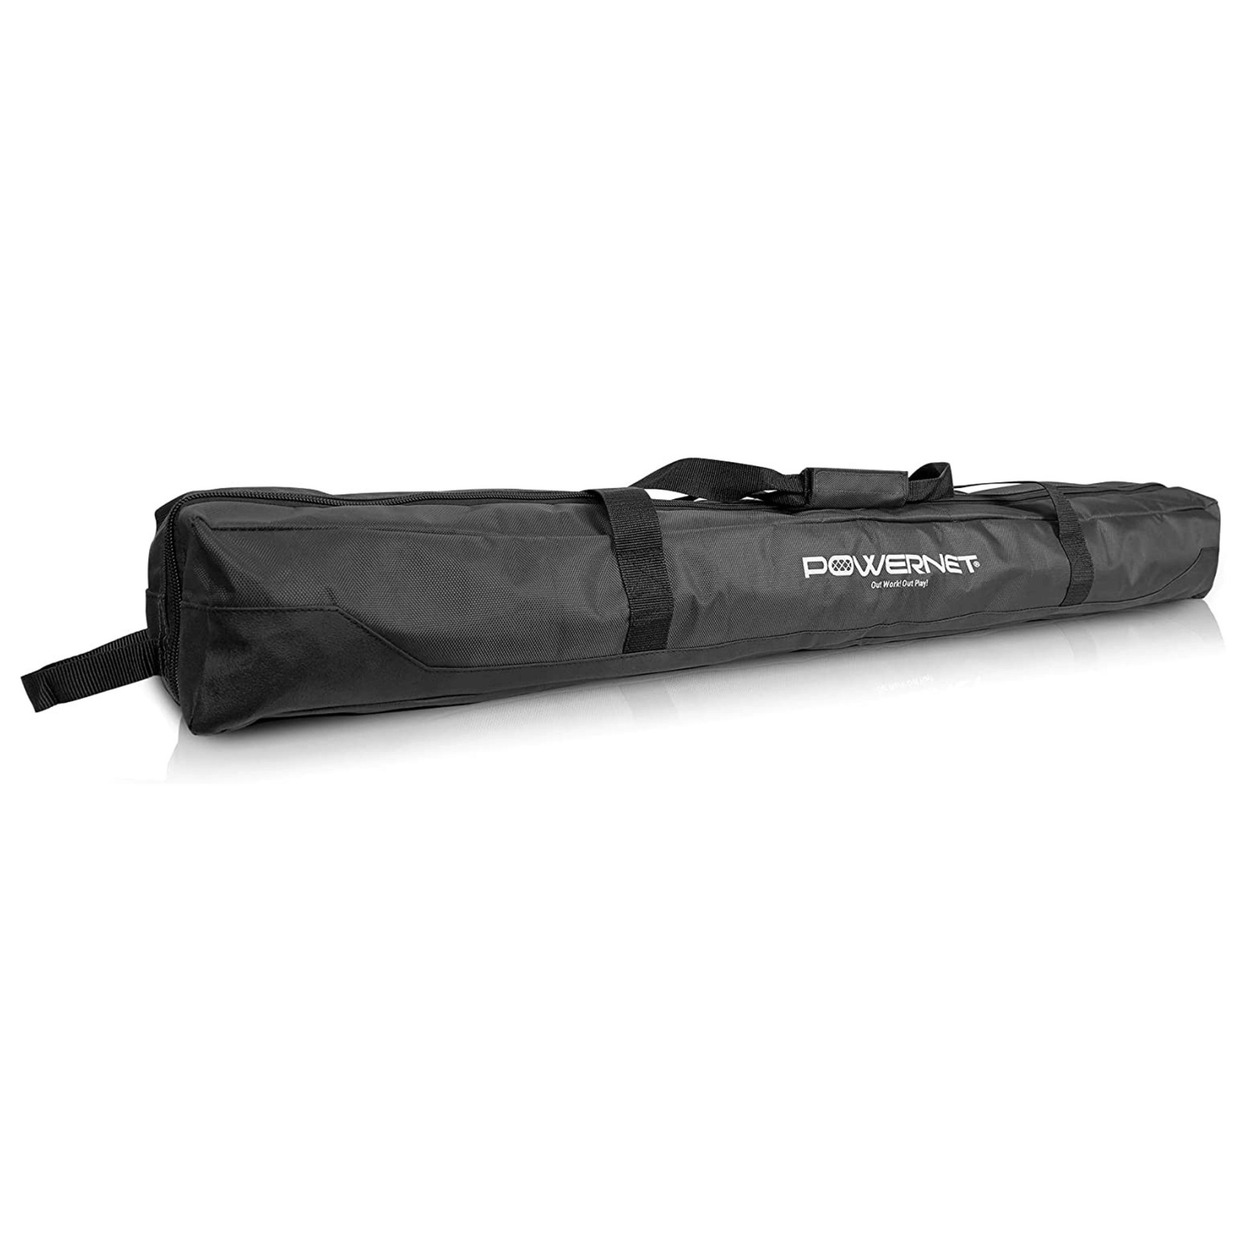 PowerNet Deluxe Replacement Carry Bag For 7x7 Baseball Softball Hitting Net (Bag Only) - Black